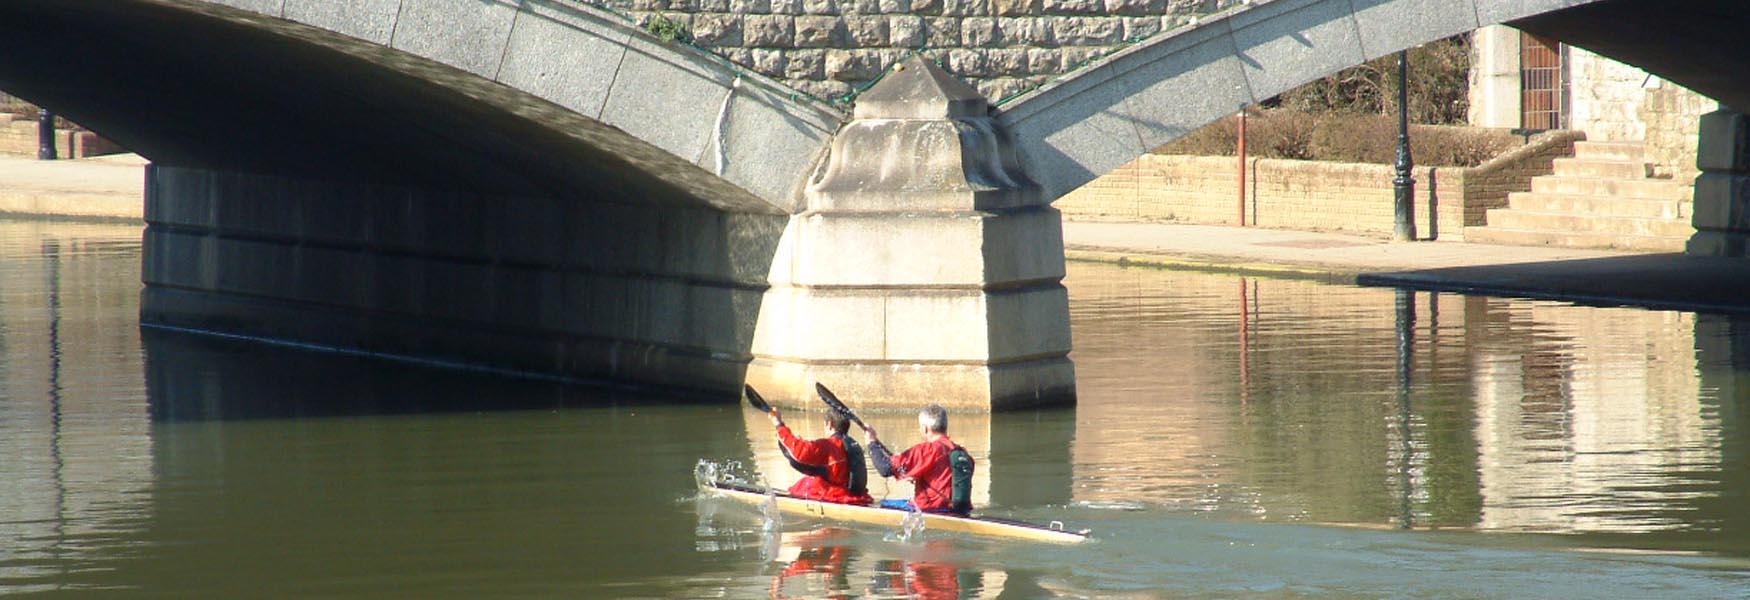 Canoeists on River Medway